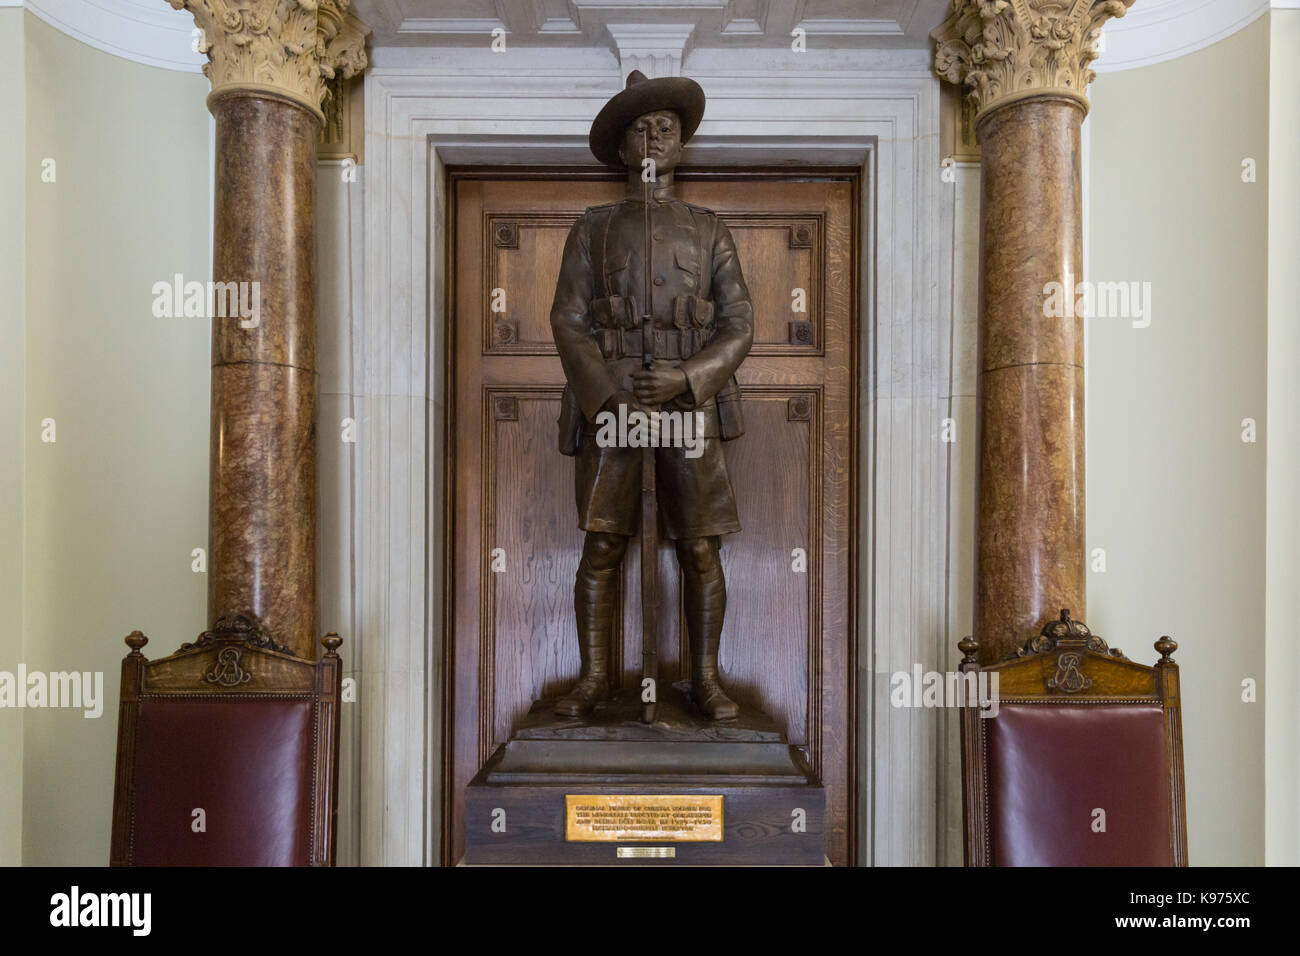 Bronze statue of Gurkha Soldier at the entrance to the British Foreign Office in Westminster, London, England, UK Stock Photo